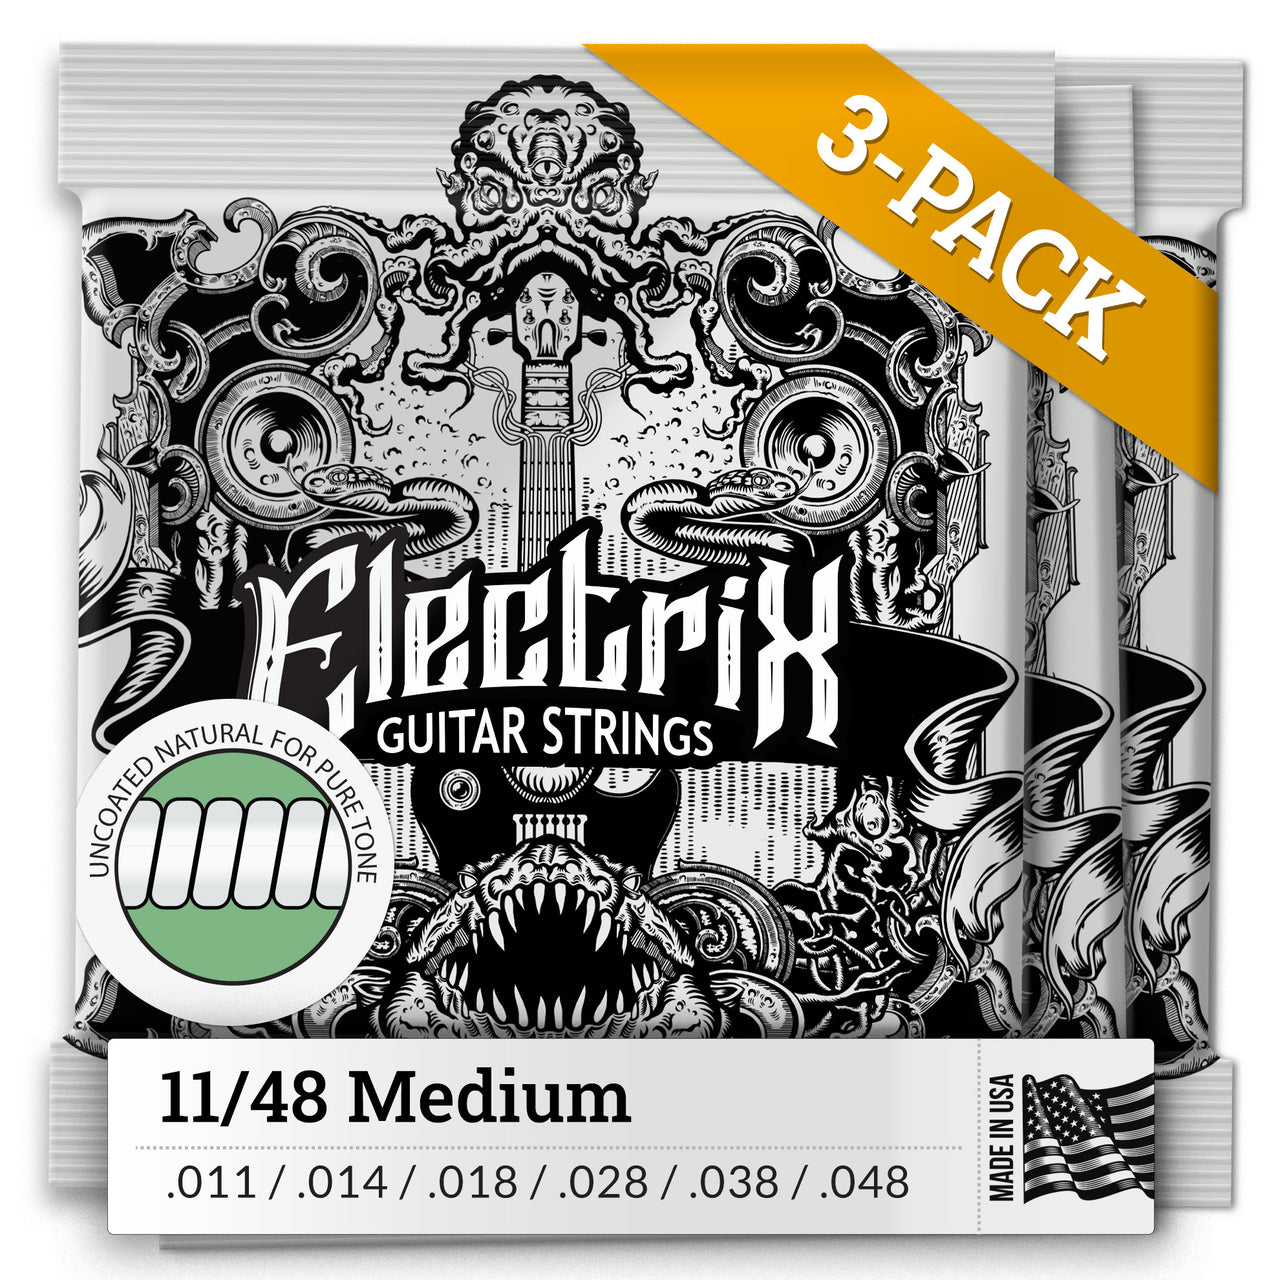 UNCOATED Electric Guitar Strings